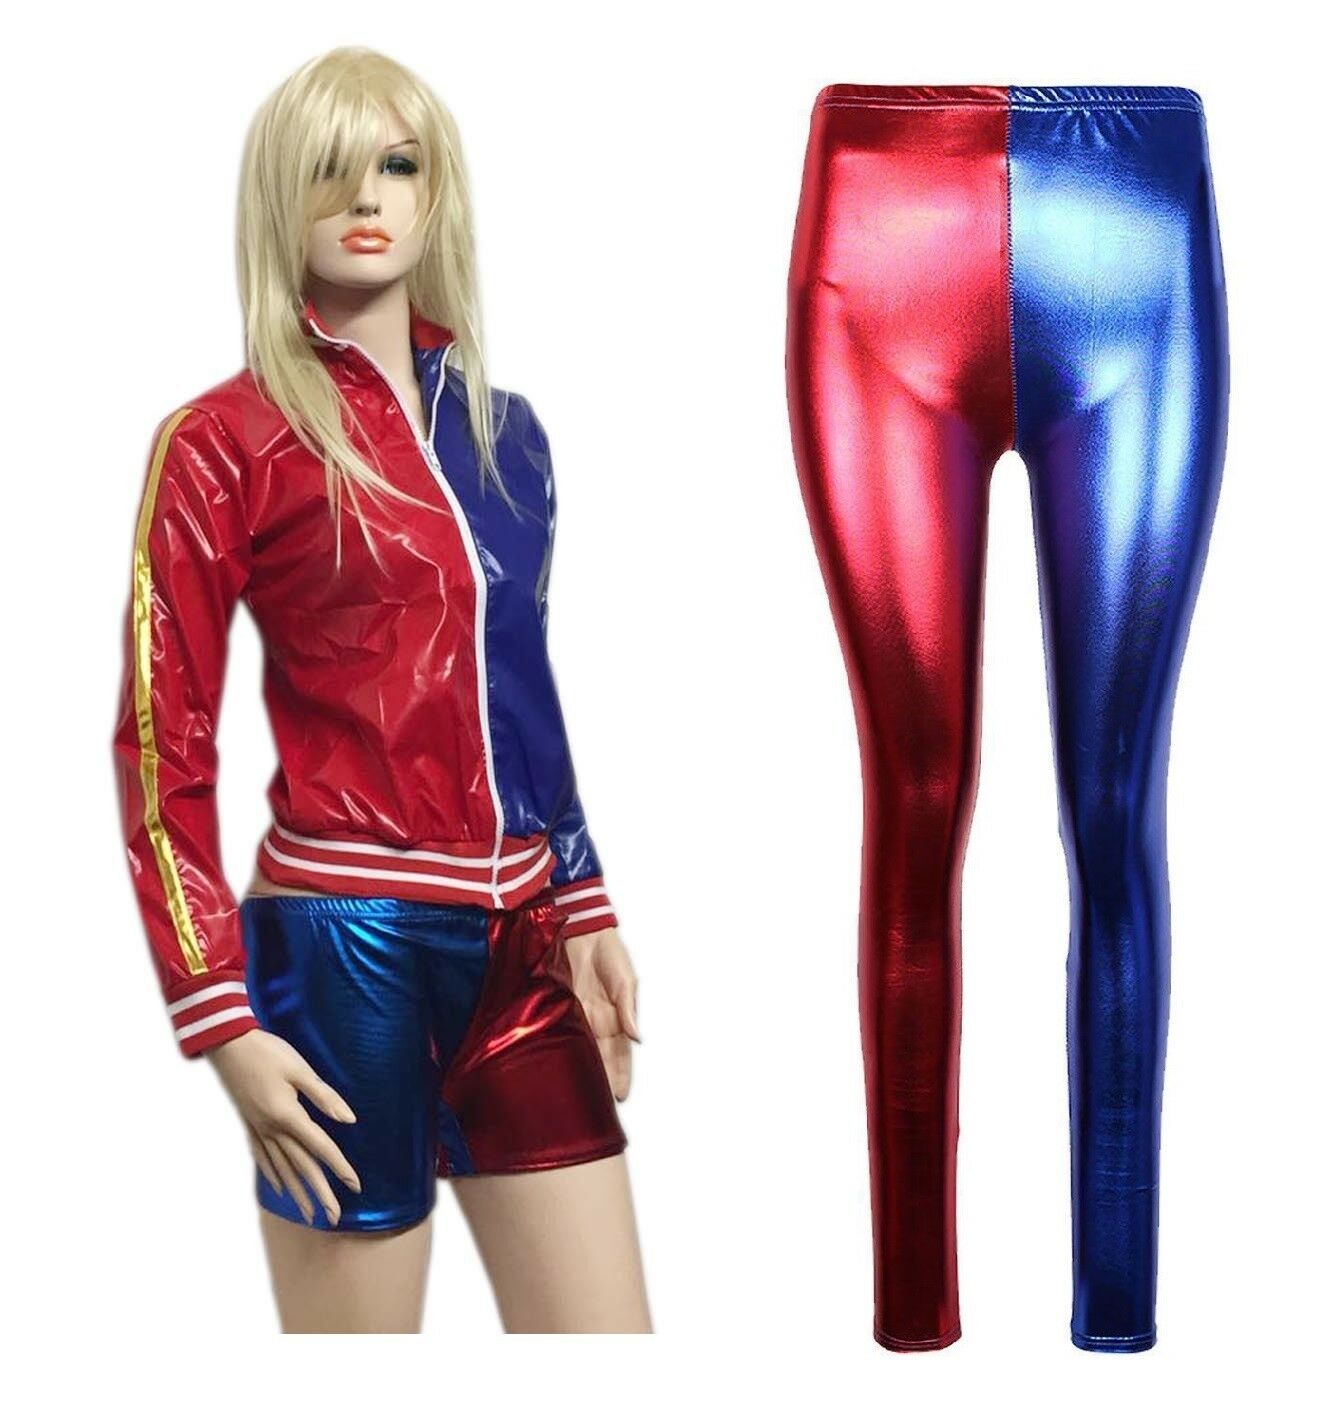 Adult "Harley Quinn" Inspired Outfit. You Can Mix And Match How You Want Your Outfit.Sizes Are 8-18. 